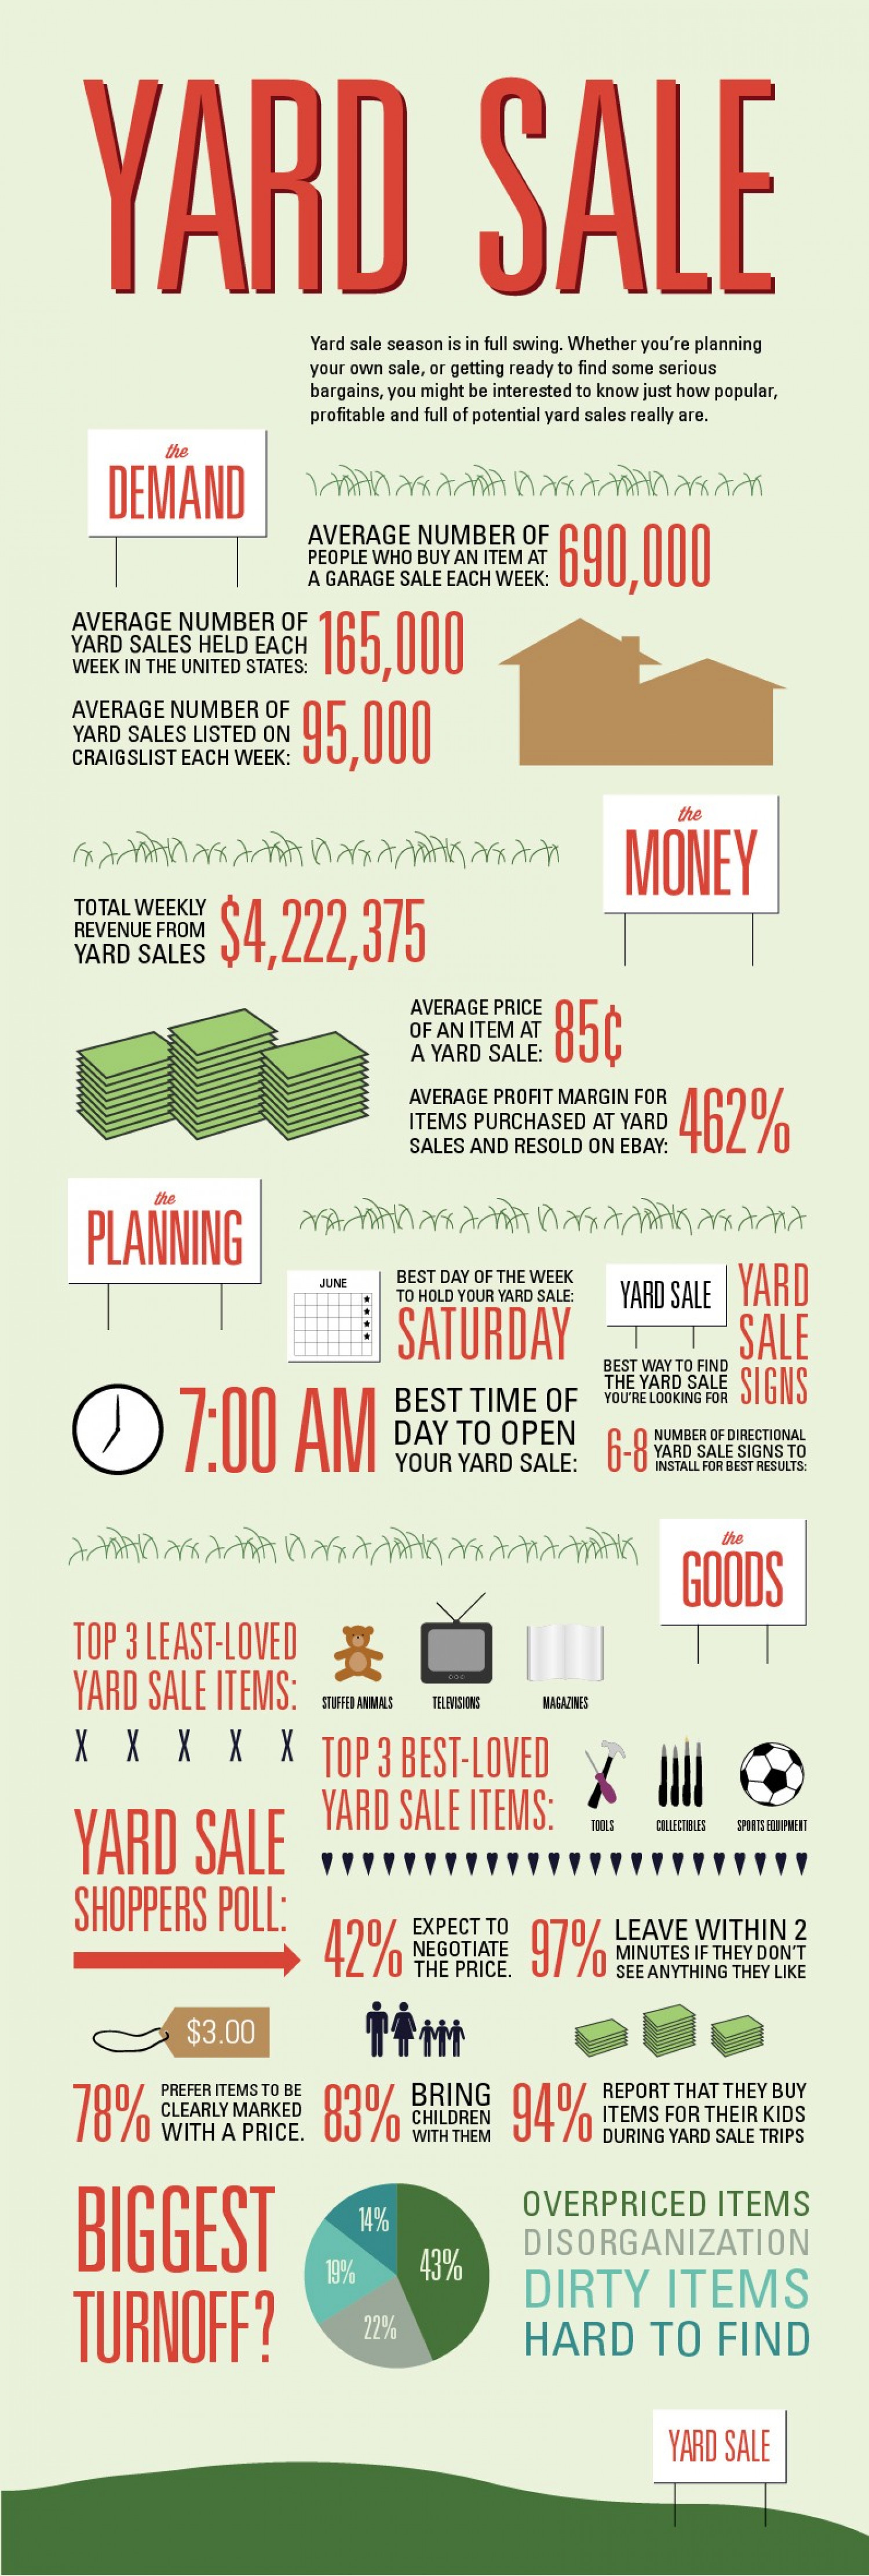 Signs.com Yard Sale Sign  Infographic